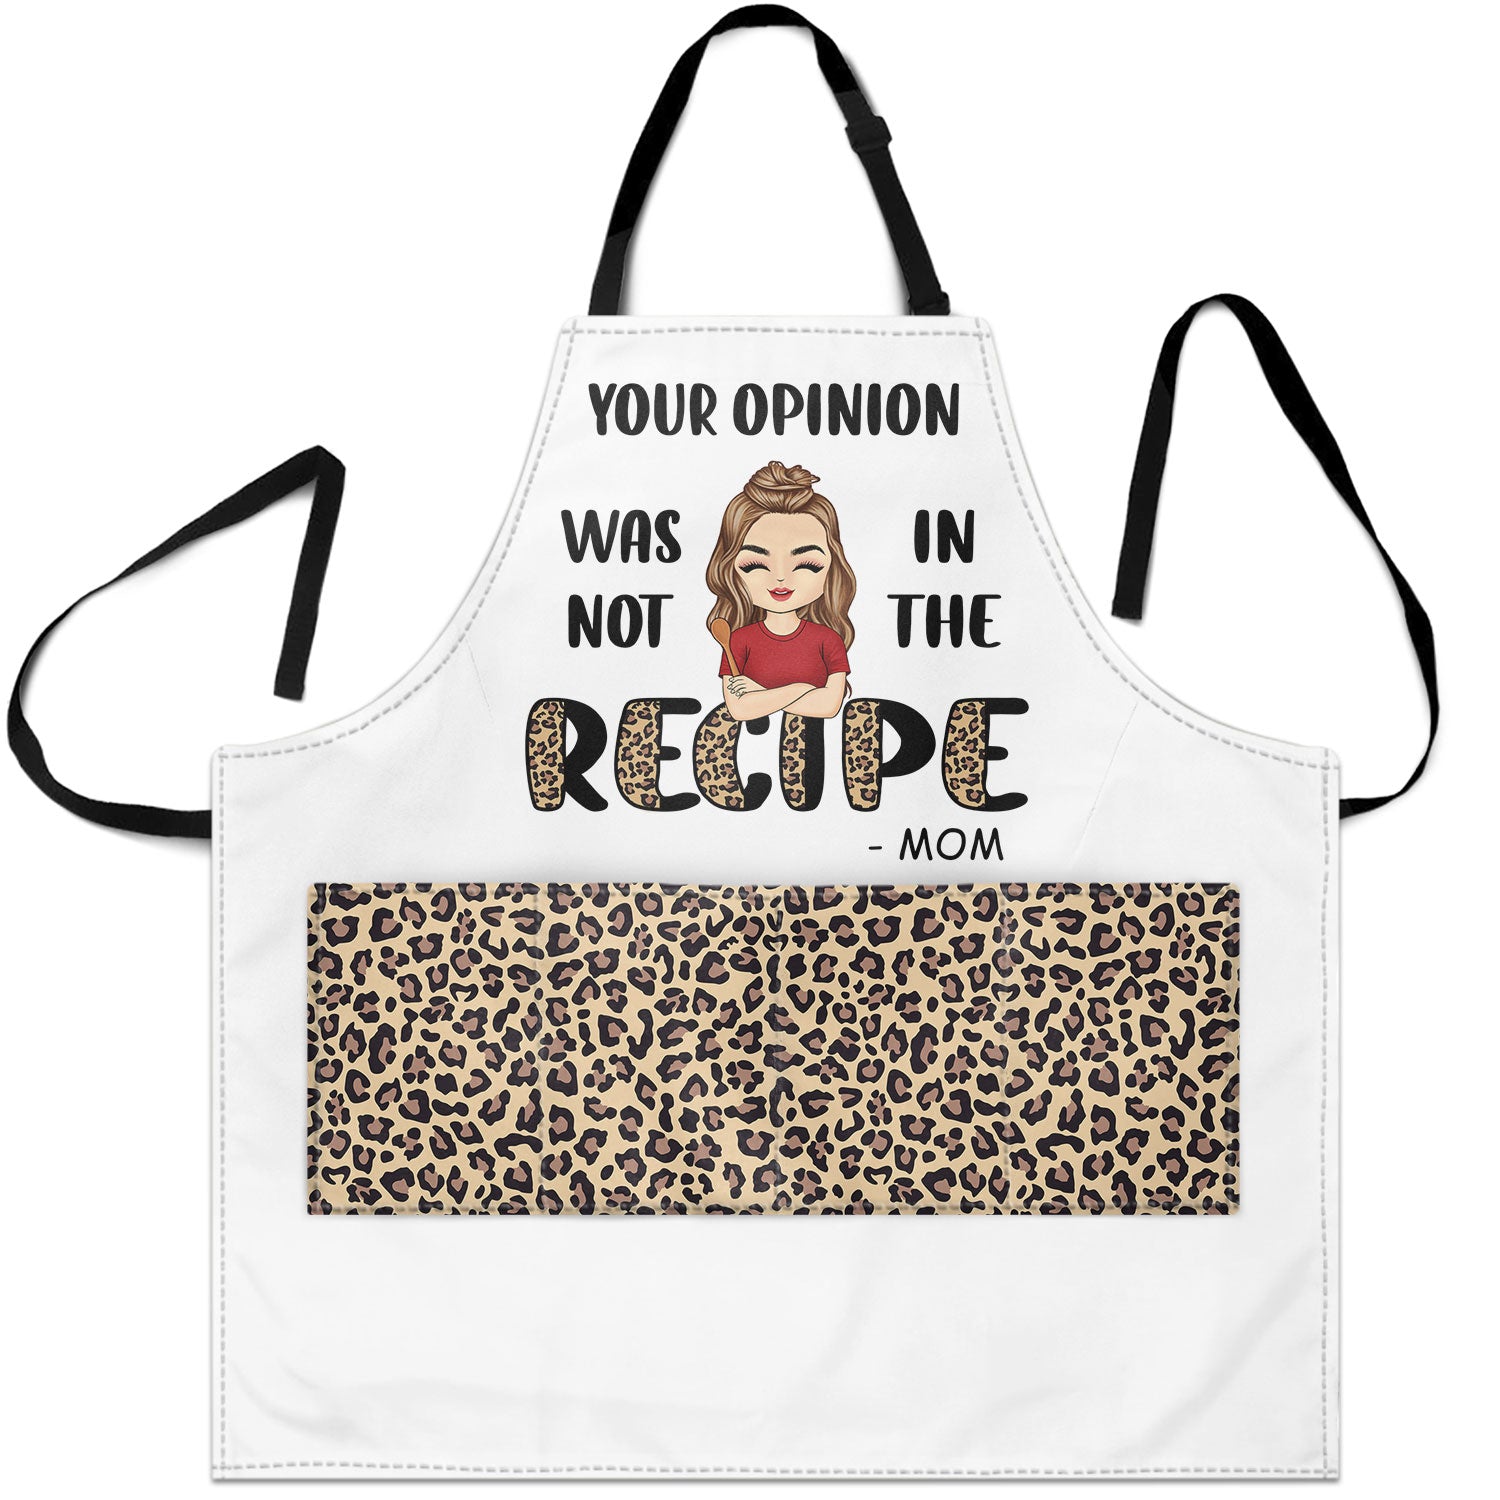 Cooking In The Recipe - Funny Gift For Wives, Mothers - Personalized Apron